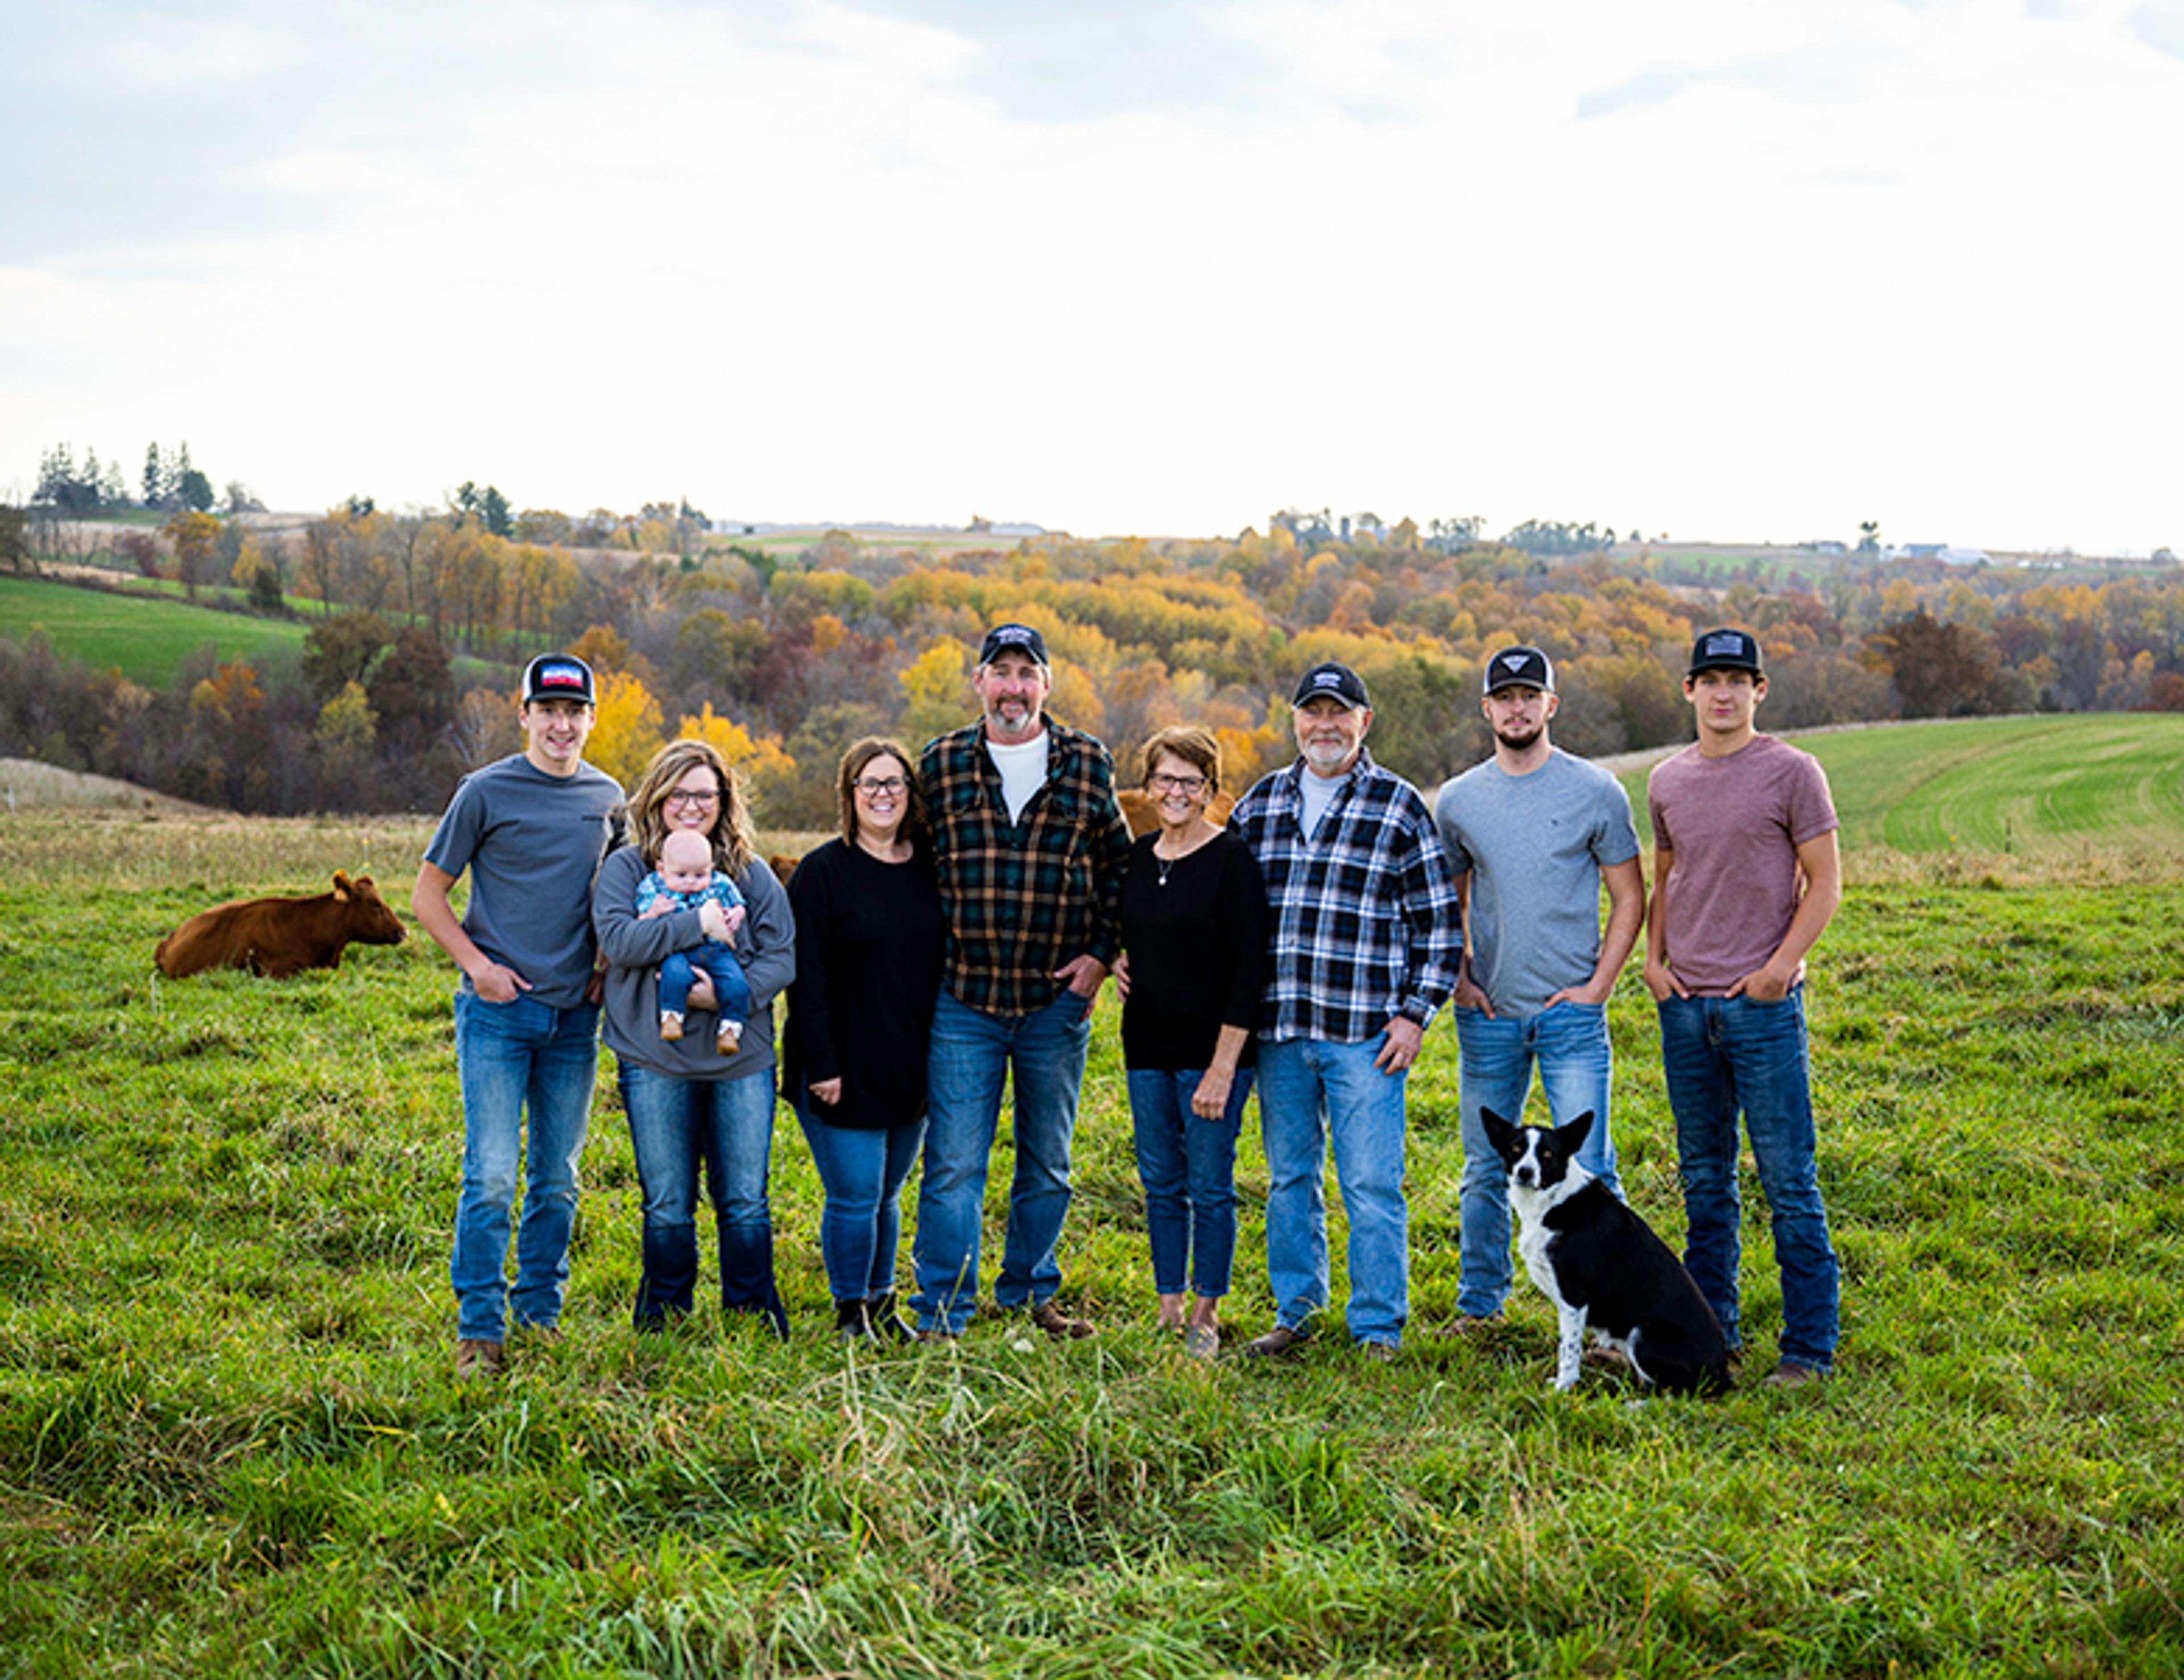 Family Farmers together with farm dog in cow pasture with fall colors on trees.